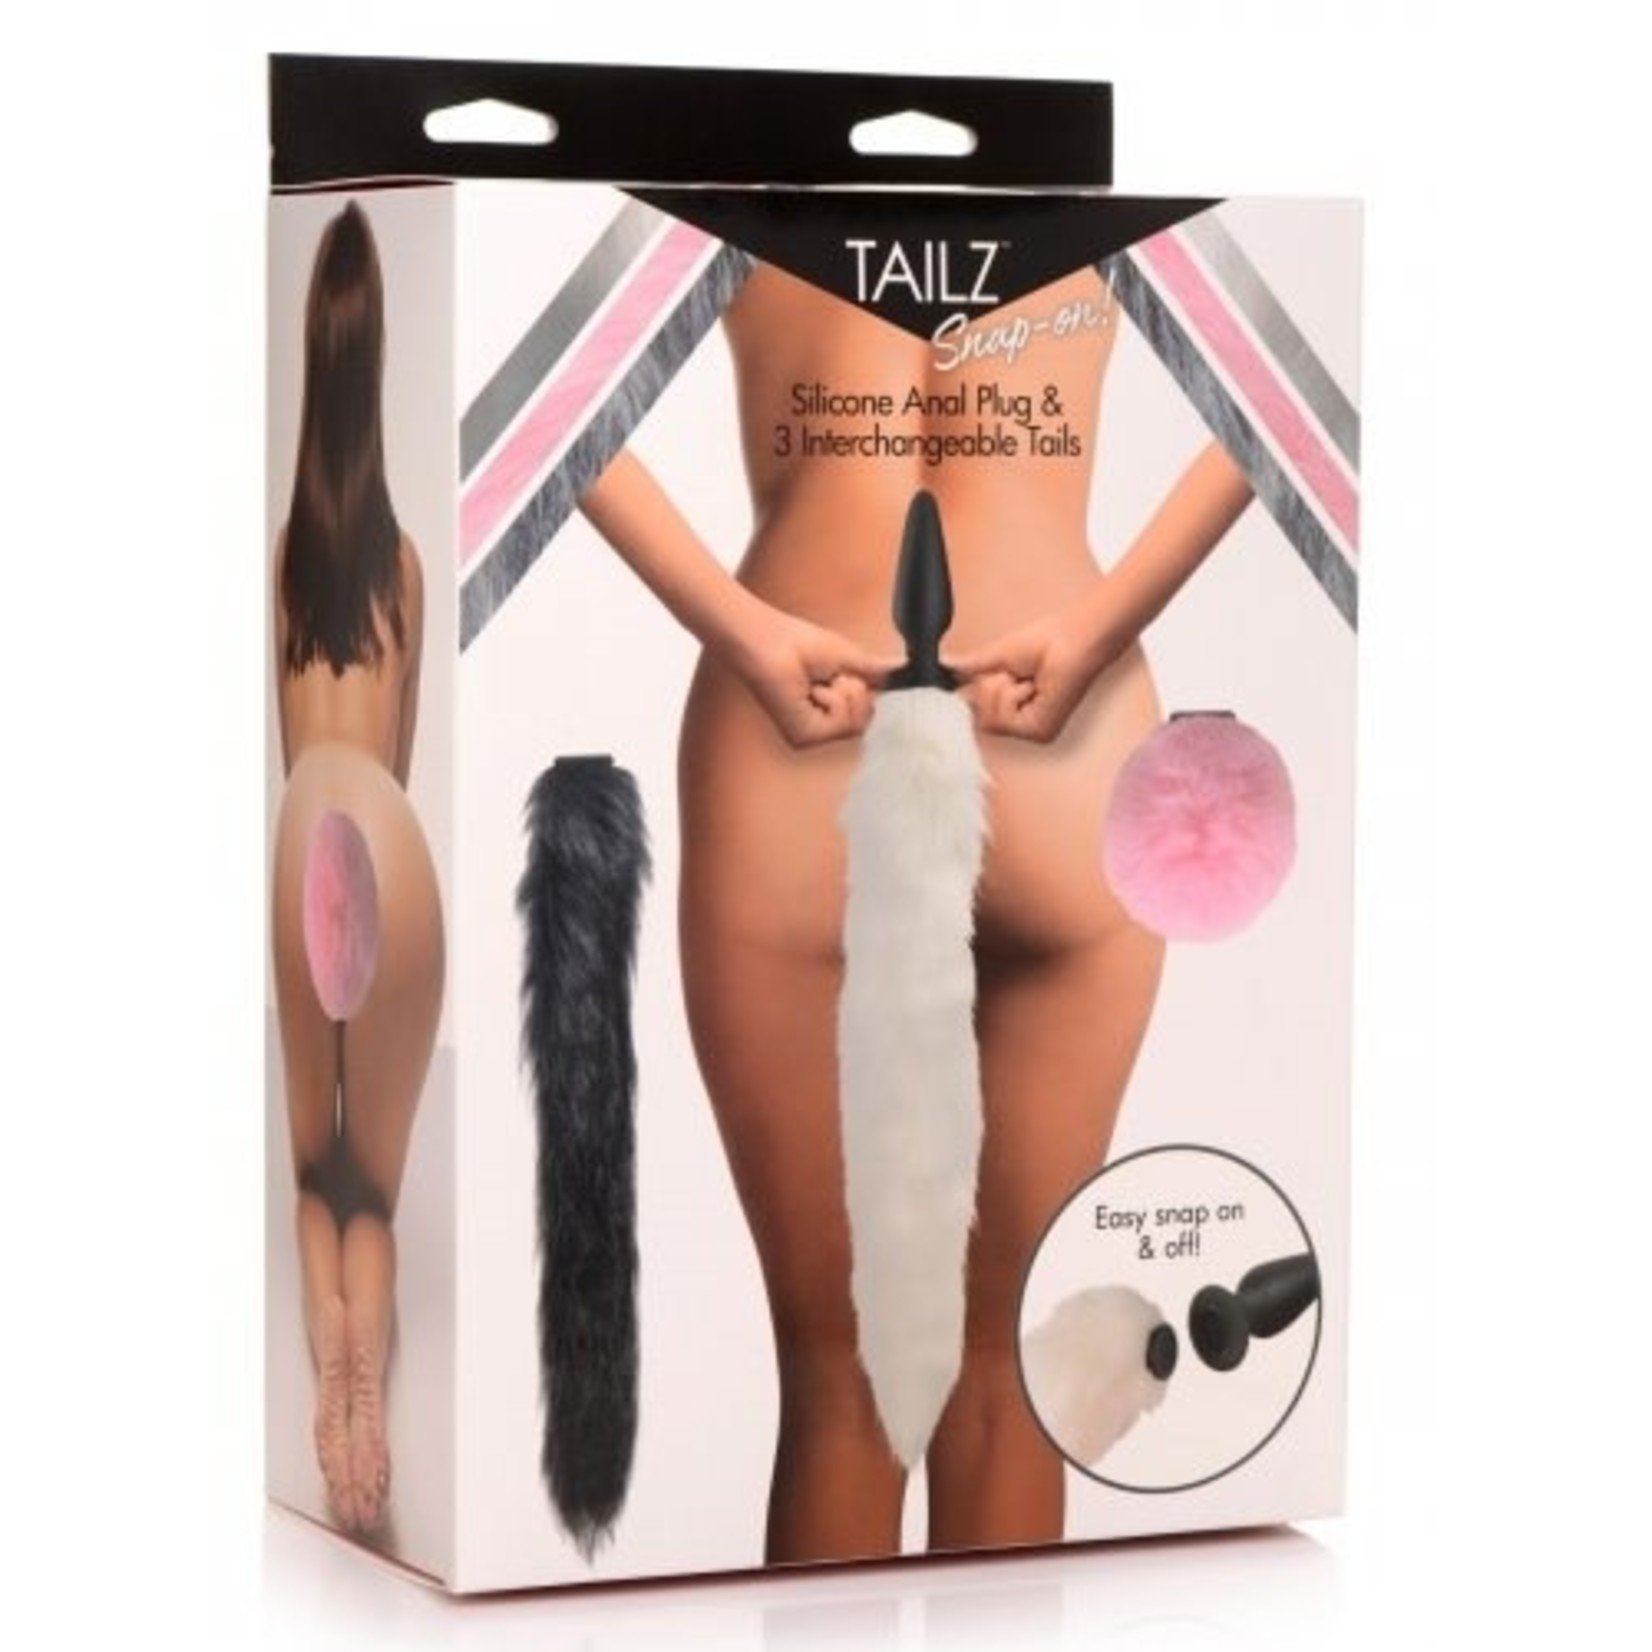 XR BRANDS TAILZ - SNAP-ON SILICONE ANAL PLUG & 3 INTERCHANGEABLE TAILS